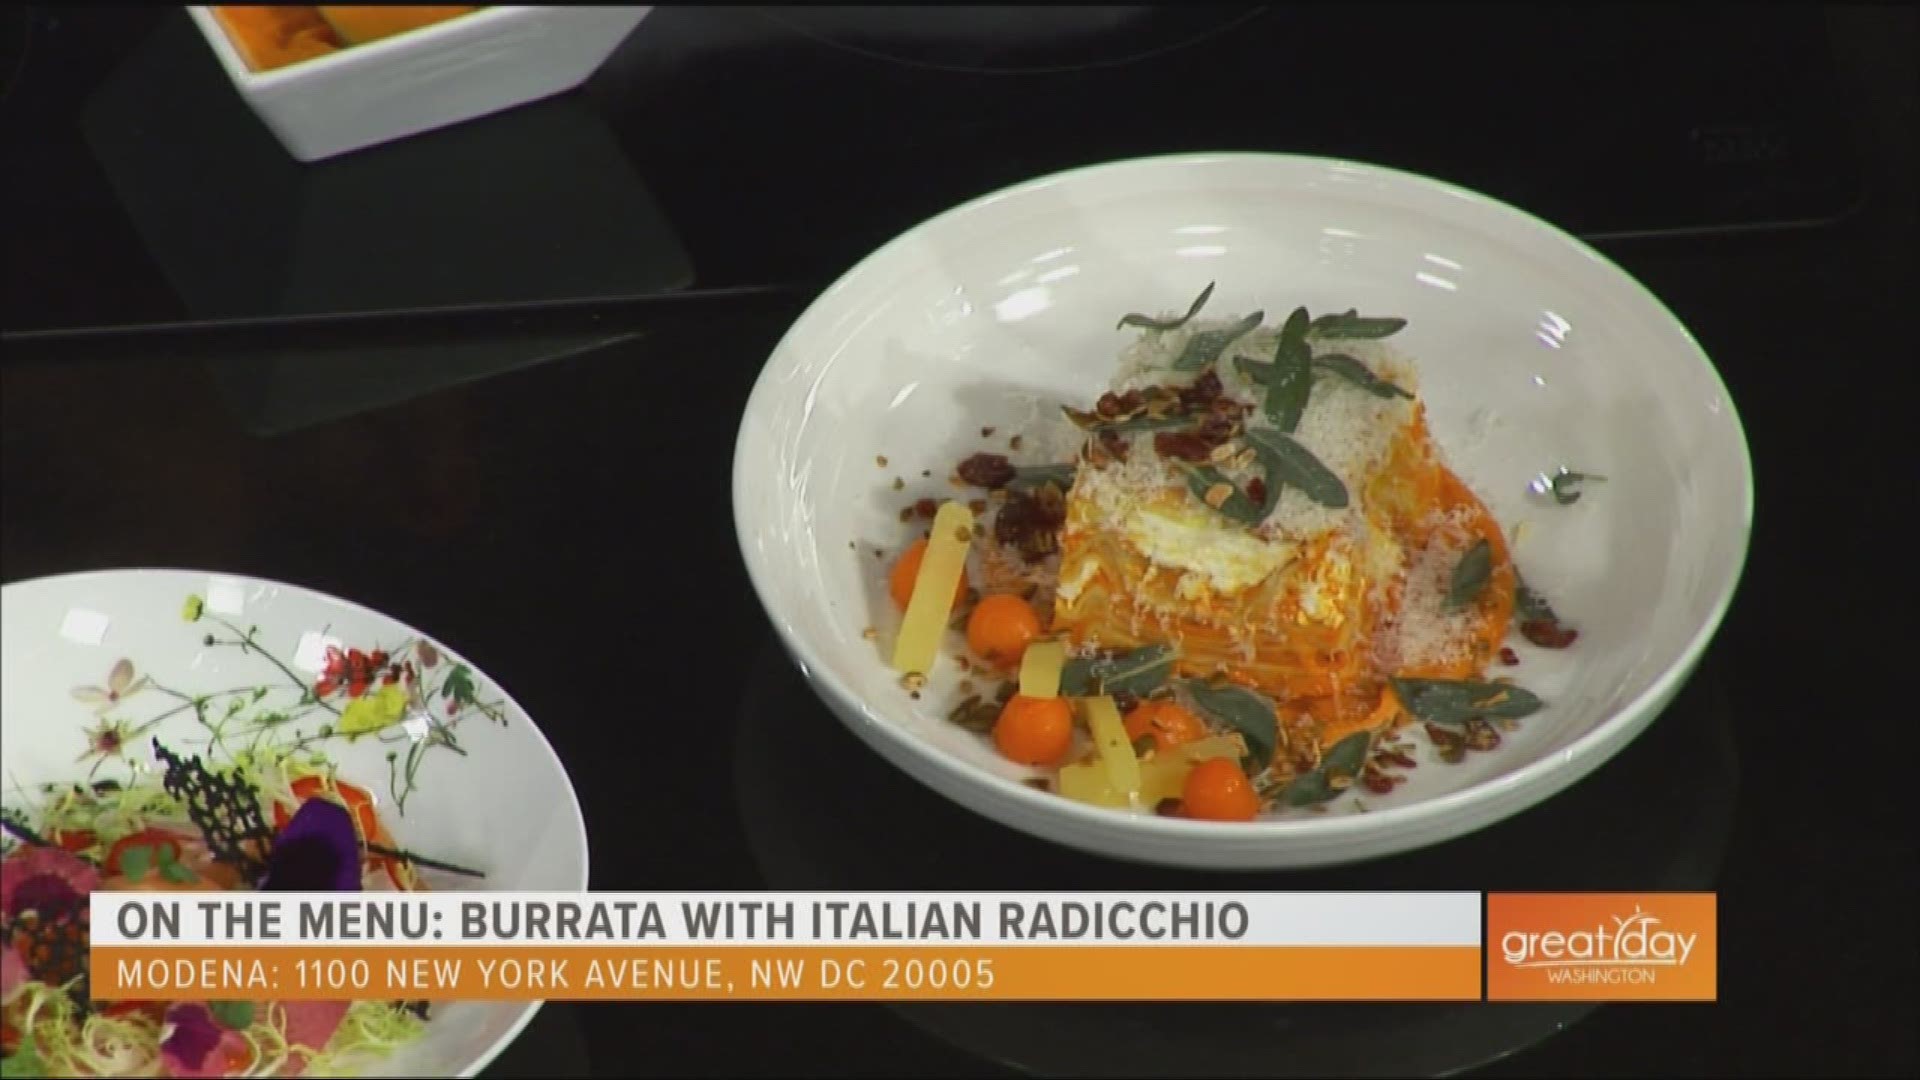 John Melfi, executive chef at Modena shows creative ways to dress up your Thanksgiving leftovers.